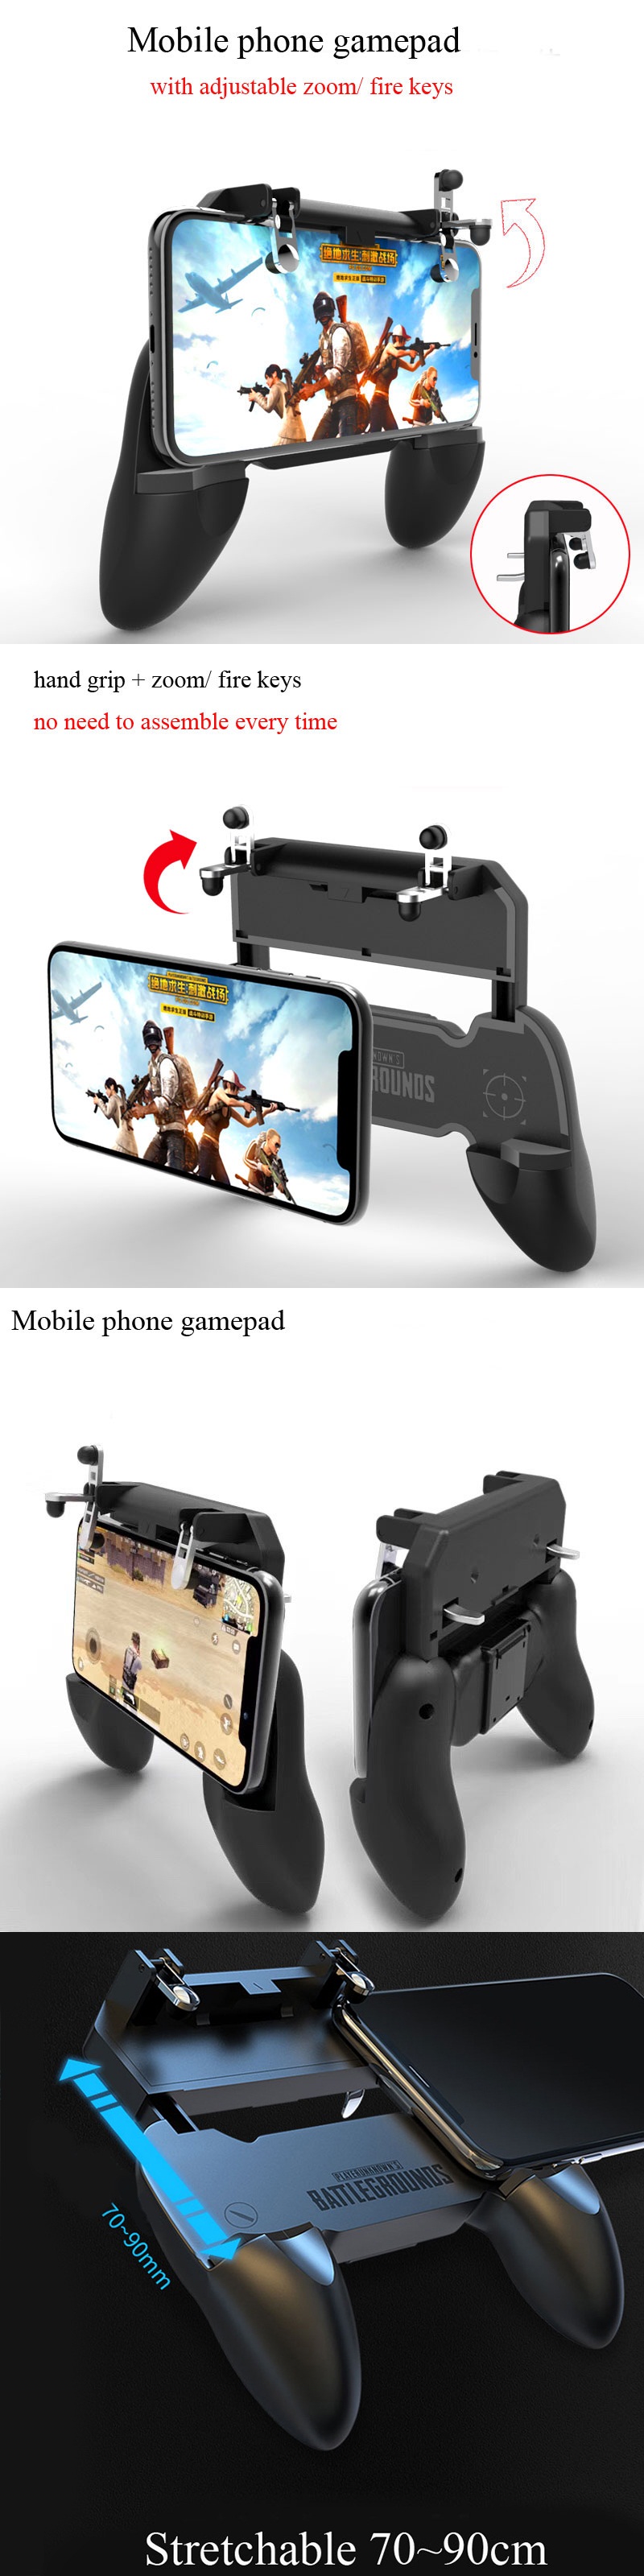 Bakeey K21 W1+ PUGB  Peace Elite Gaming Pad Fast Shooting Button Controller Gamepad For iPhone X XS Huawei P30 Mate 20Pro Xiaomi Mi8 Mi9 S10 S10+